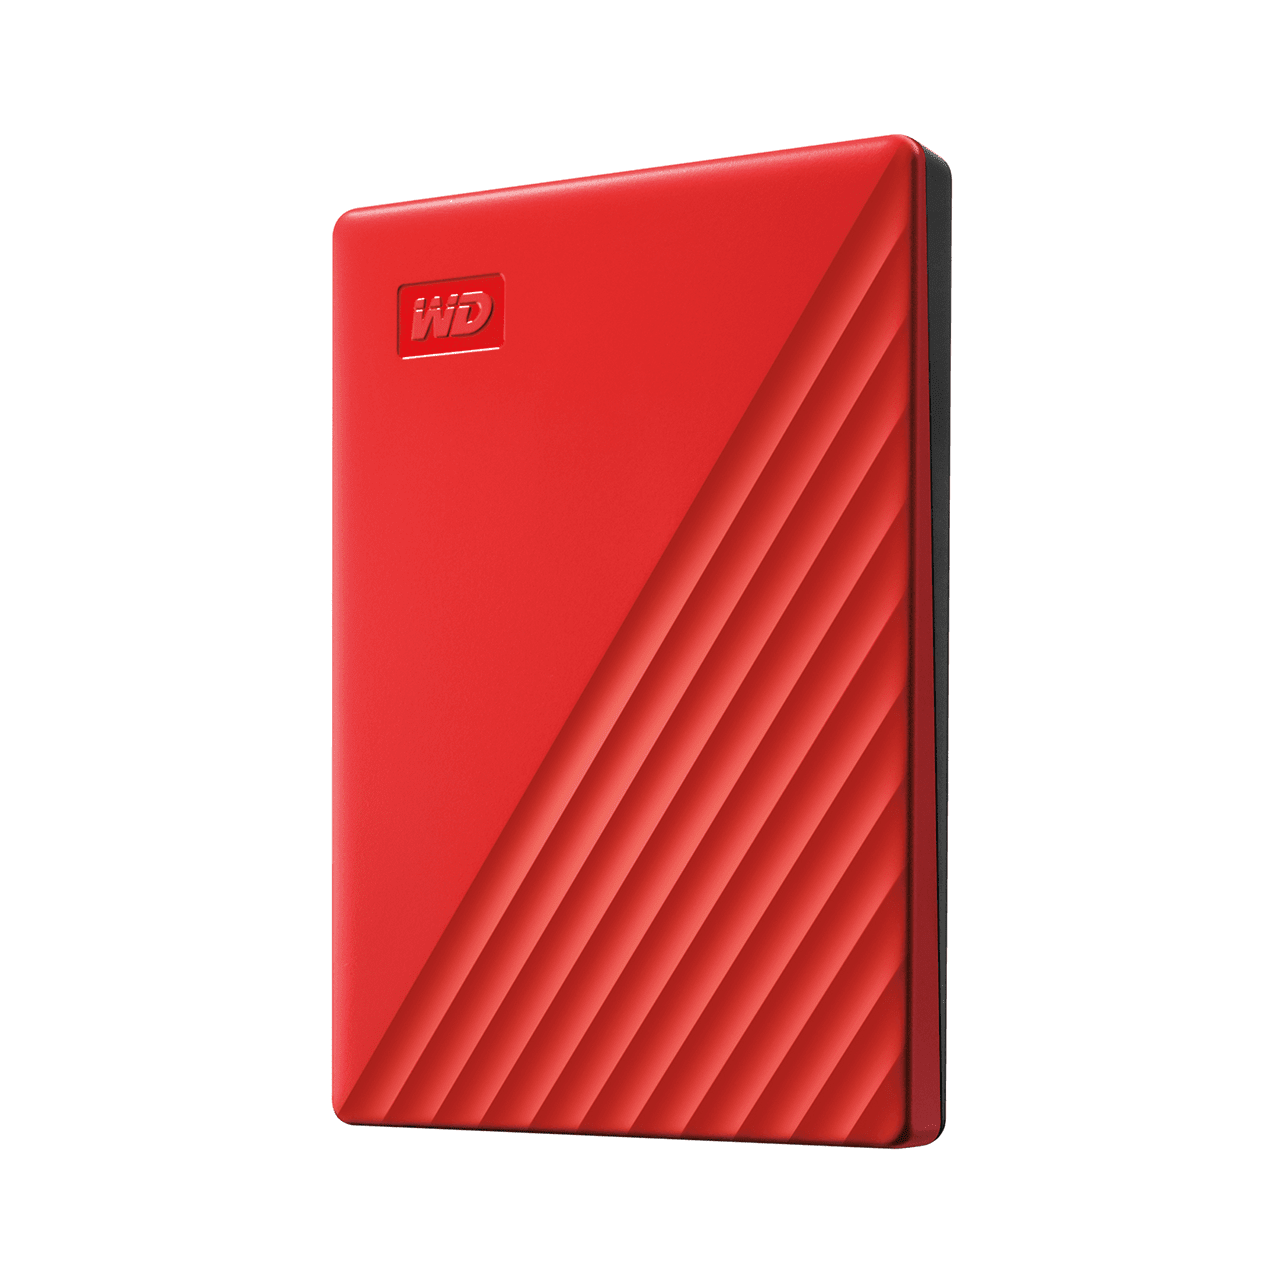 WD Western Digital My Passport  5TB ( RED ) Slim Portable External Hard Disk USB 3.0 With WD Backup Software & Password Protection